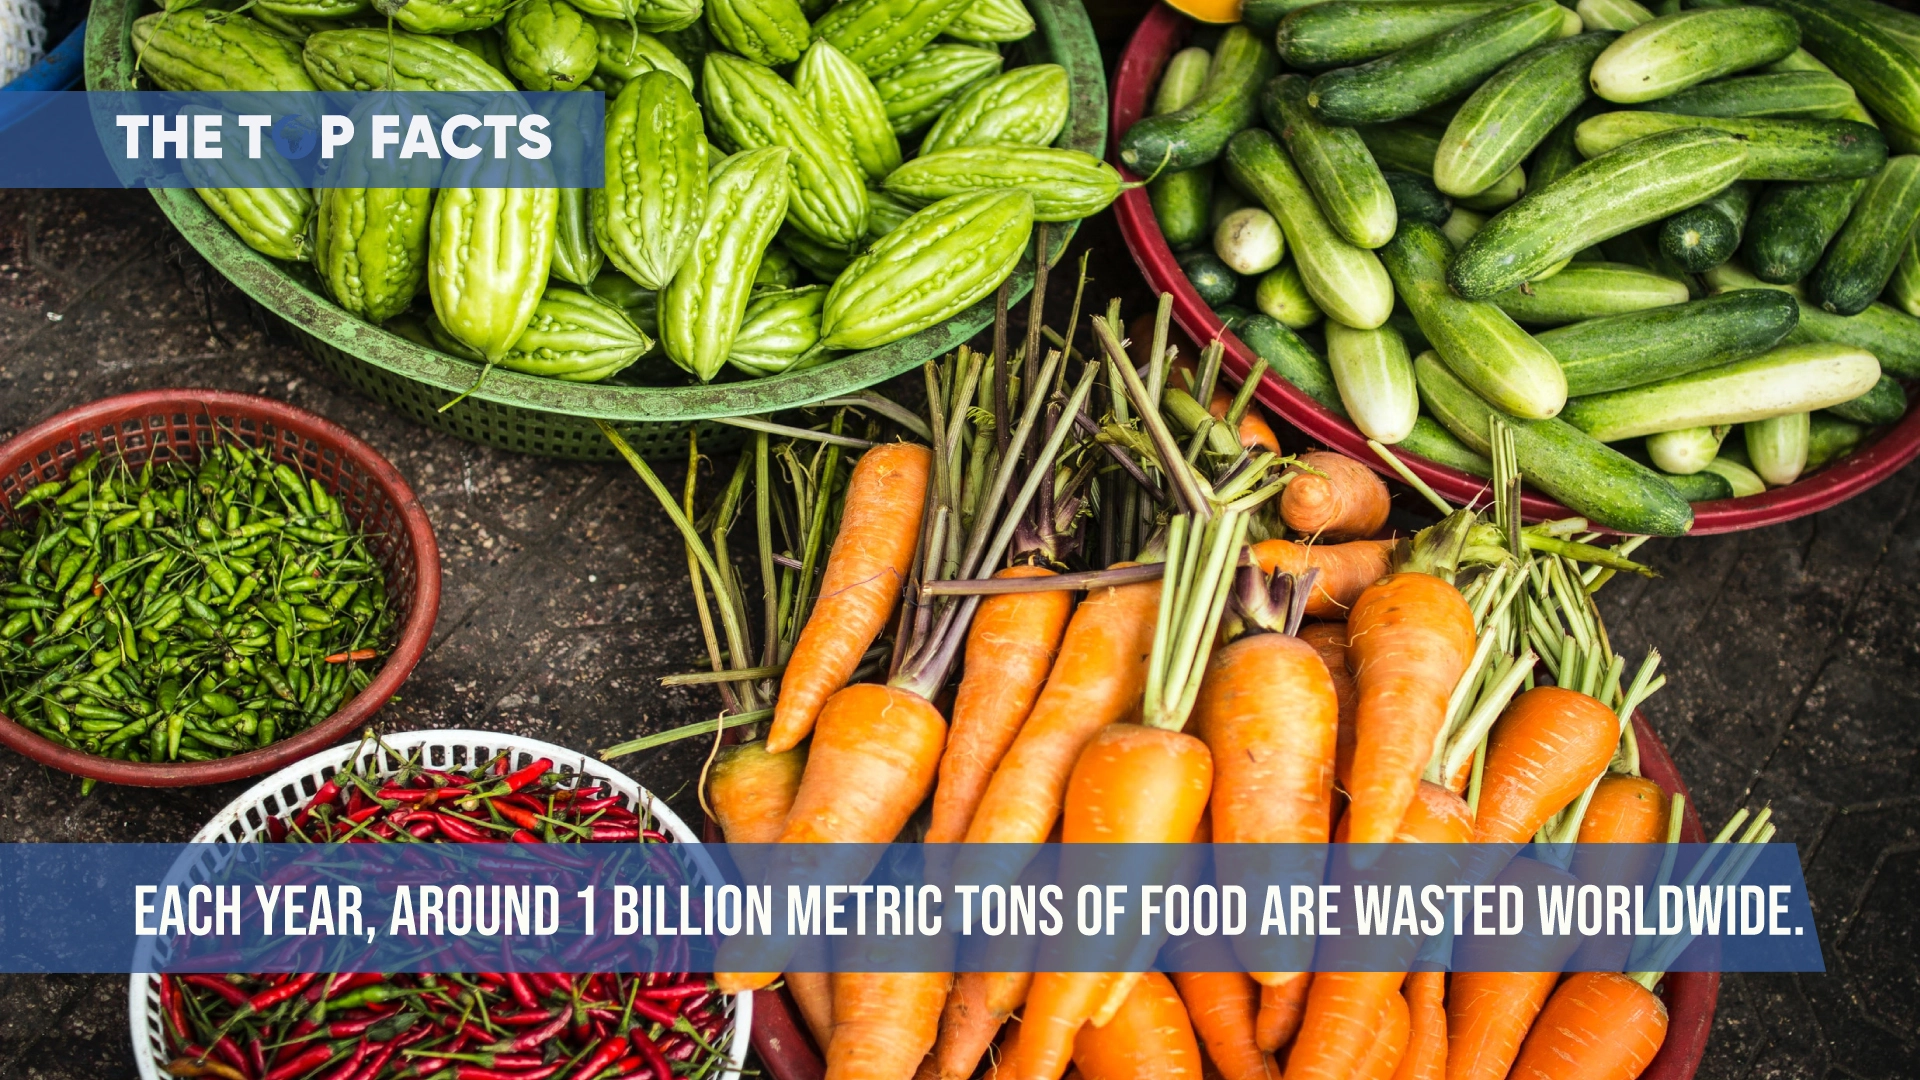 Each year, around 1 billion metric tons of food are wasted worldwide